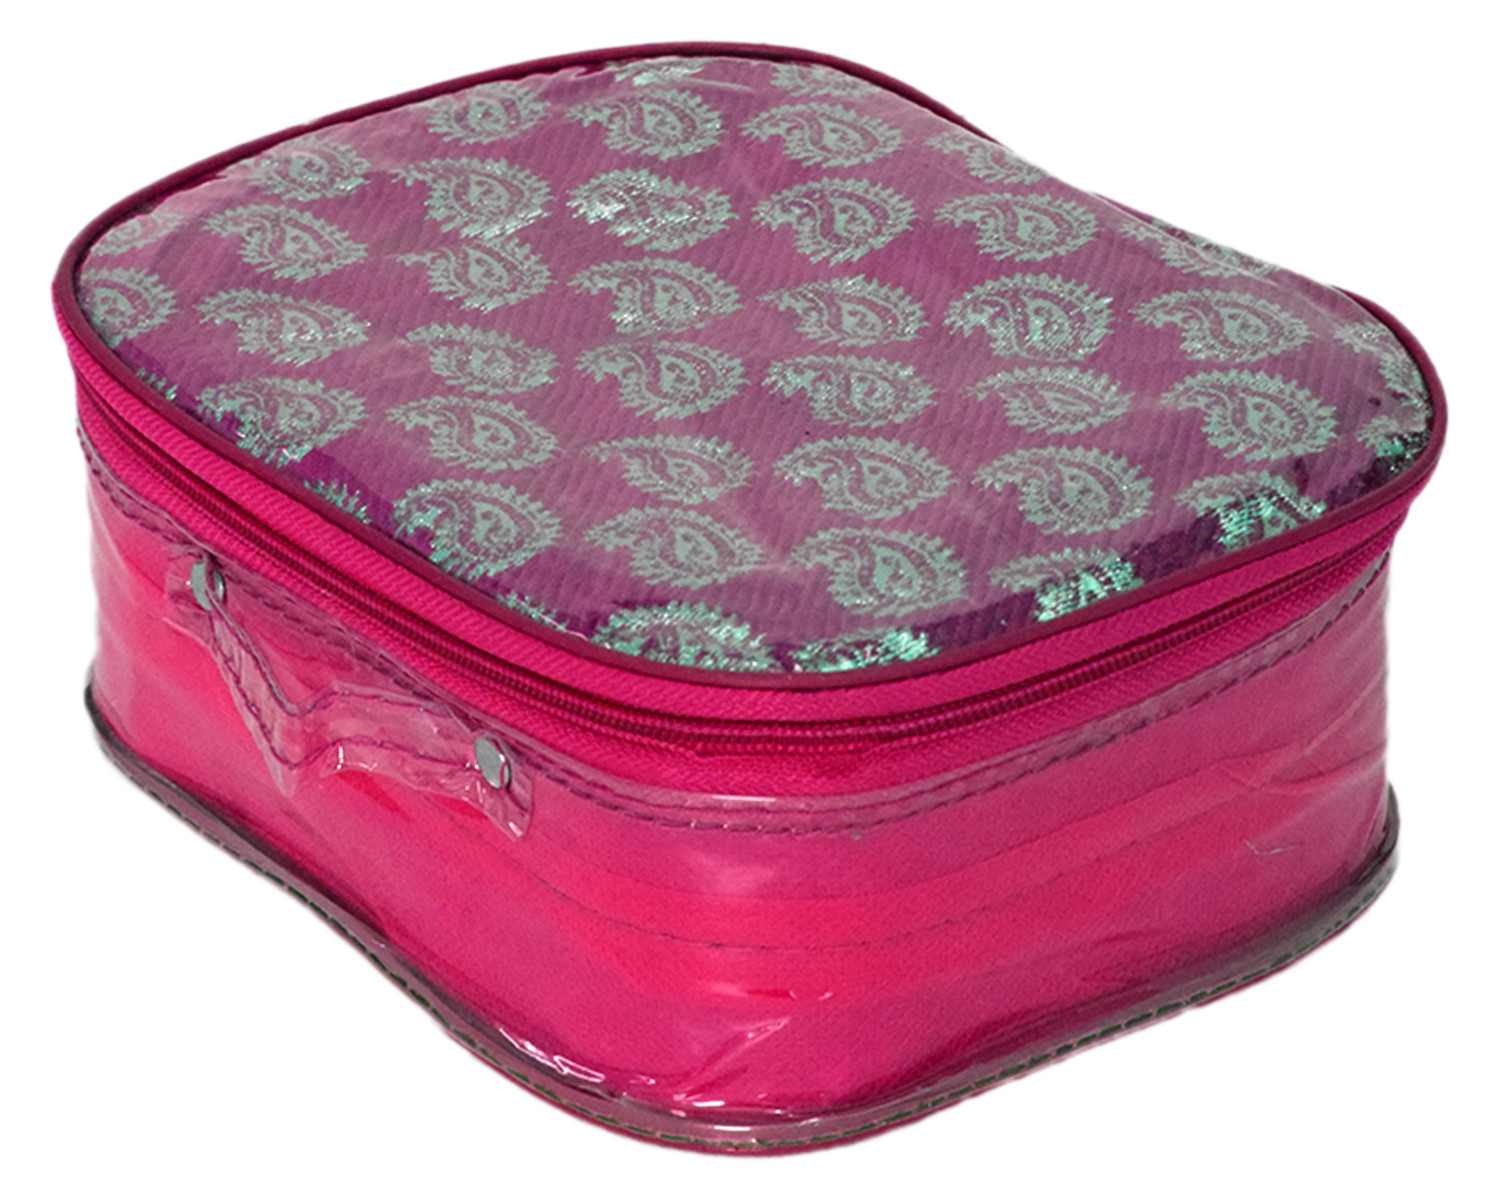 Kuber Industries Carry Printed Multiuses Laminated PVC Makeup/Jewellery/Cosmetic Organizer Bag, Travel Toiletry Pouch, Set of 3 (Pink)